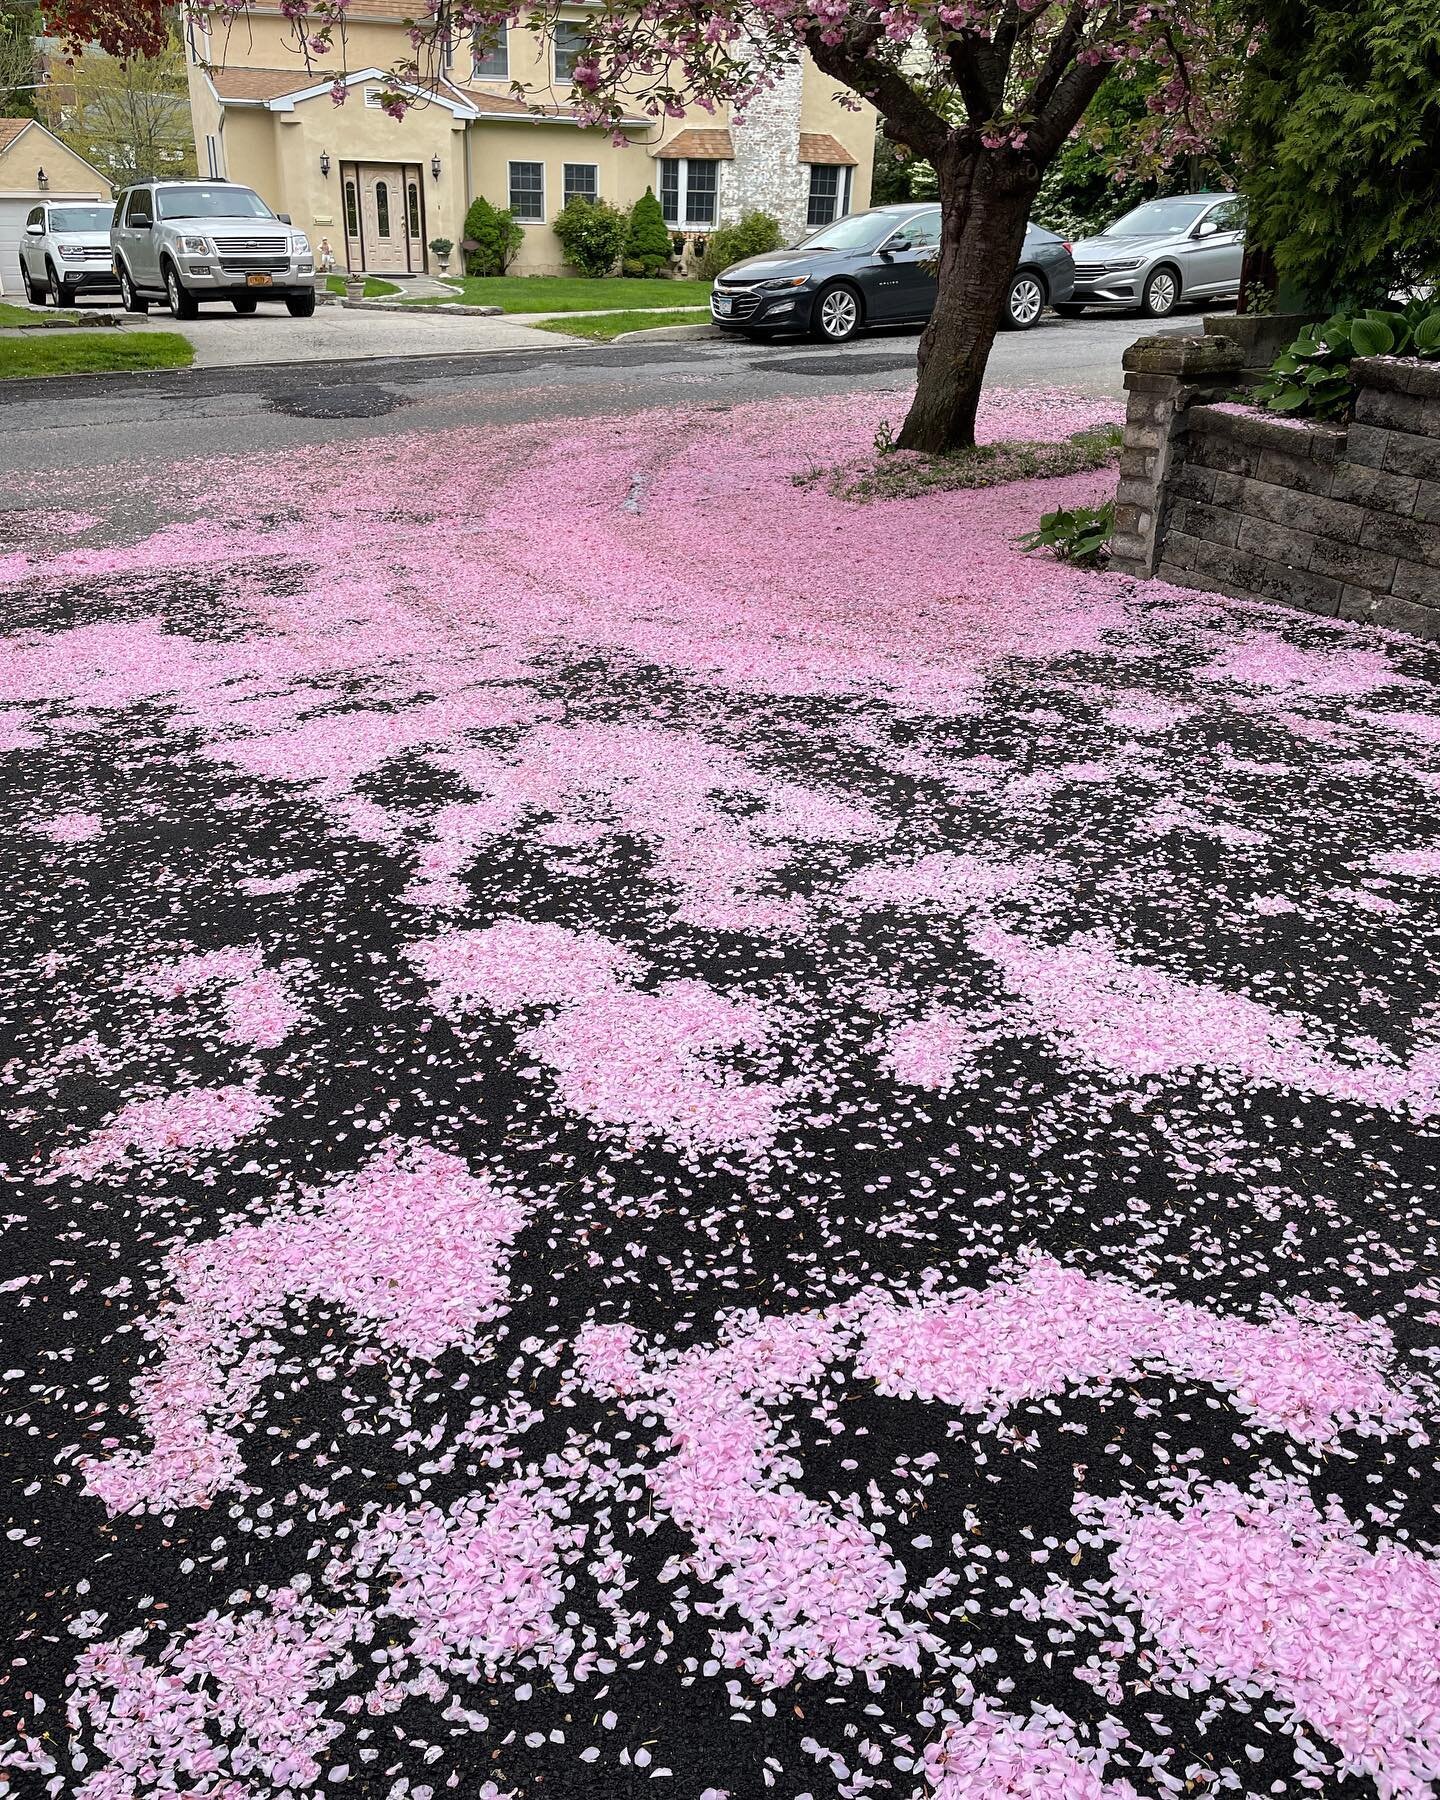 In the spring, my driveway turns to pink.

#spring 
#cherryblossom 
#pink 
#petals